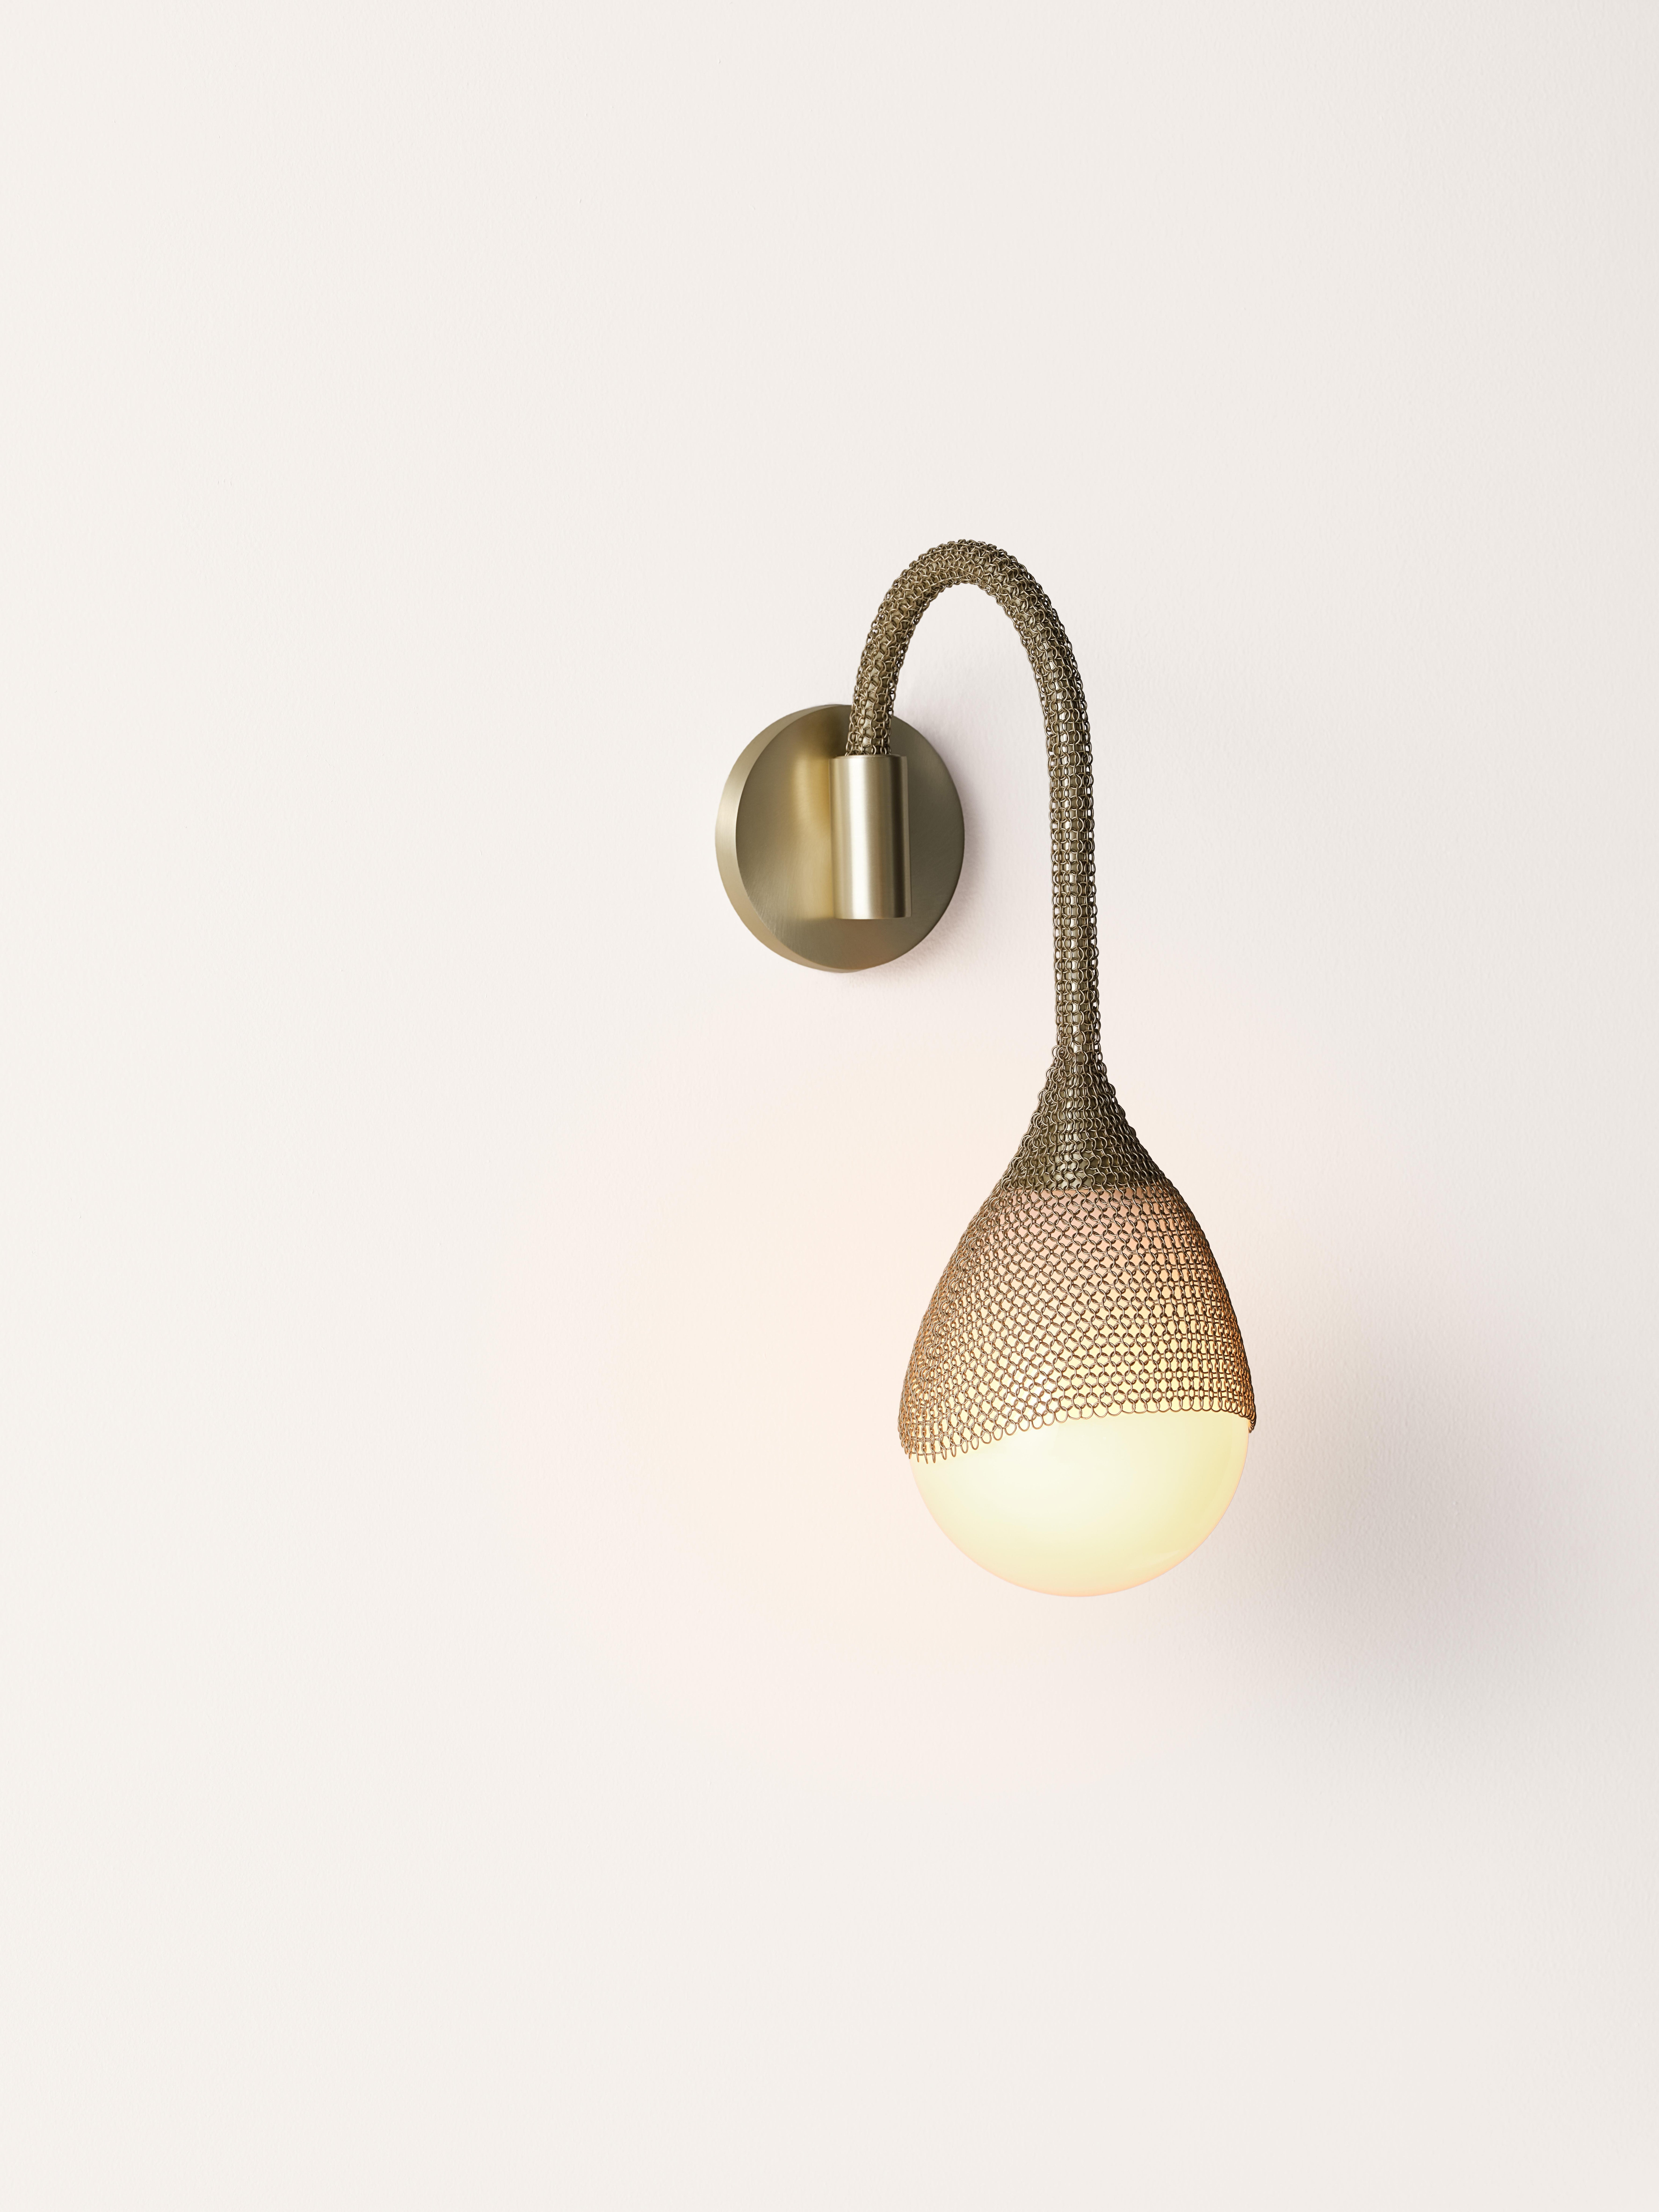 A carefully crafted, hand-blown glass pendant hangs from spun brass for an elongated and elegant tear-drop shape. Also available as a ceiling fixture.

Metal finish:
Satin brass, oil-rubbed bronze, antique brass, satin nickel, antique nickel, or